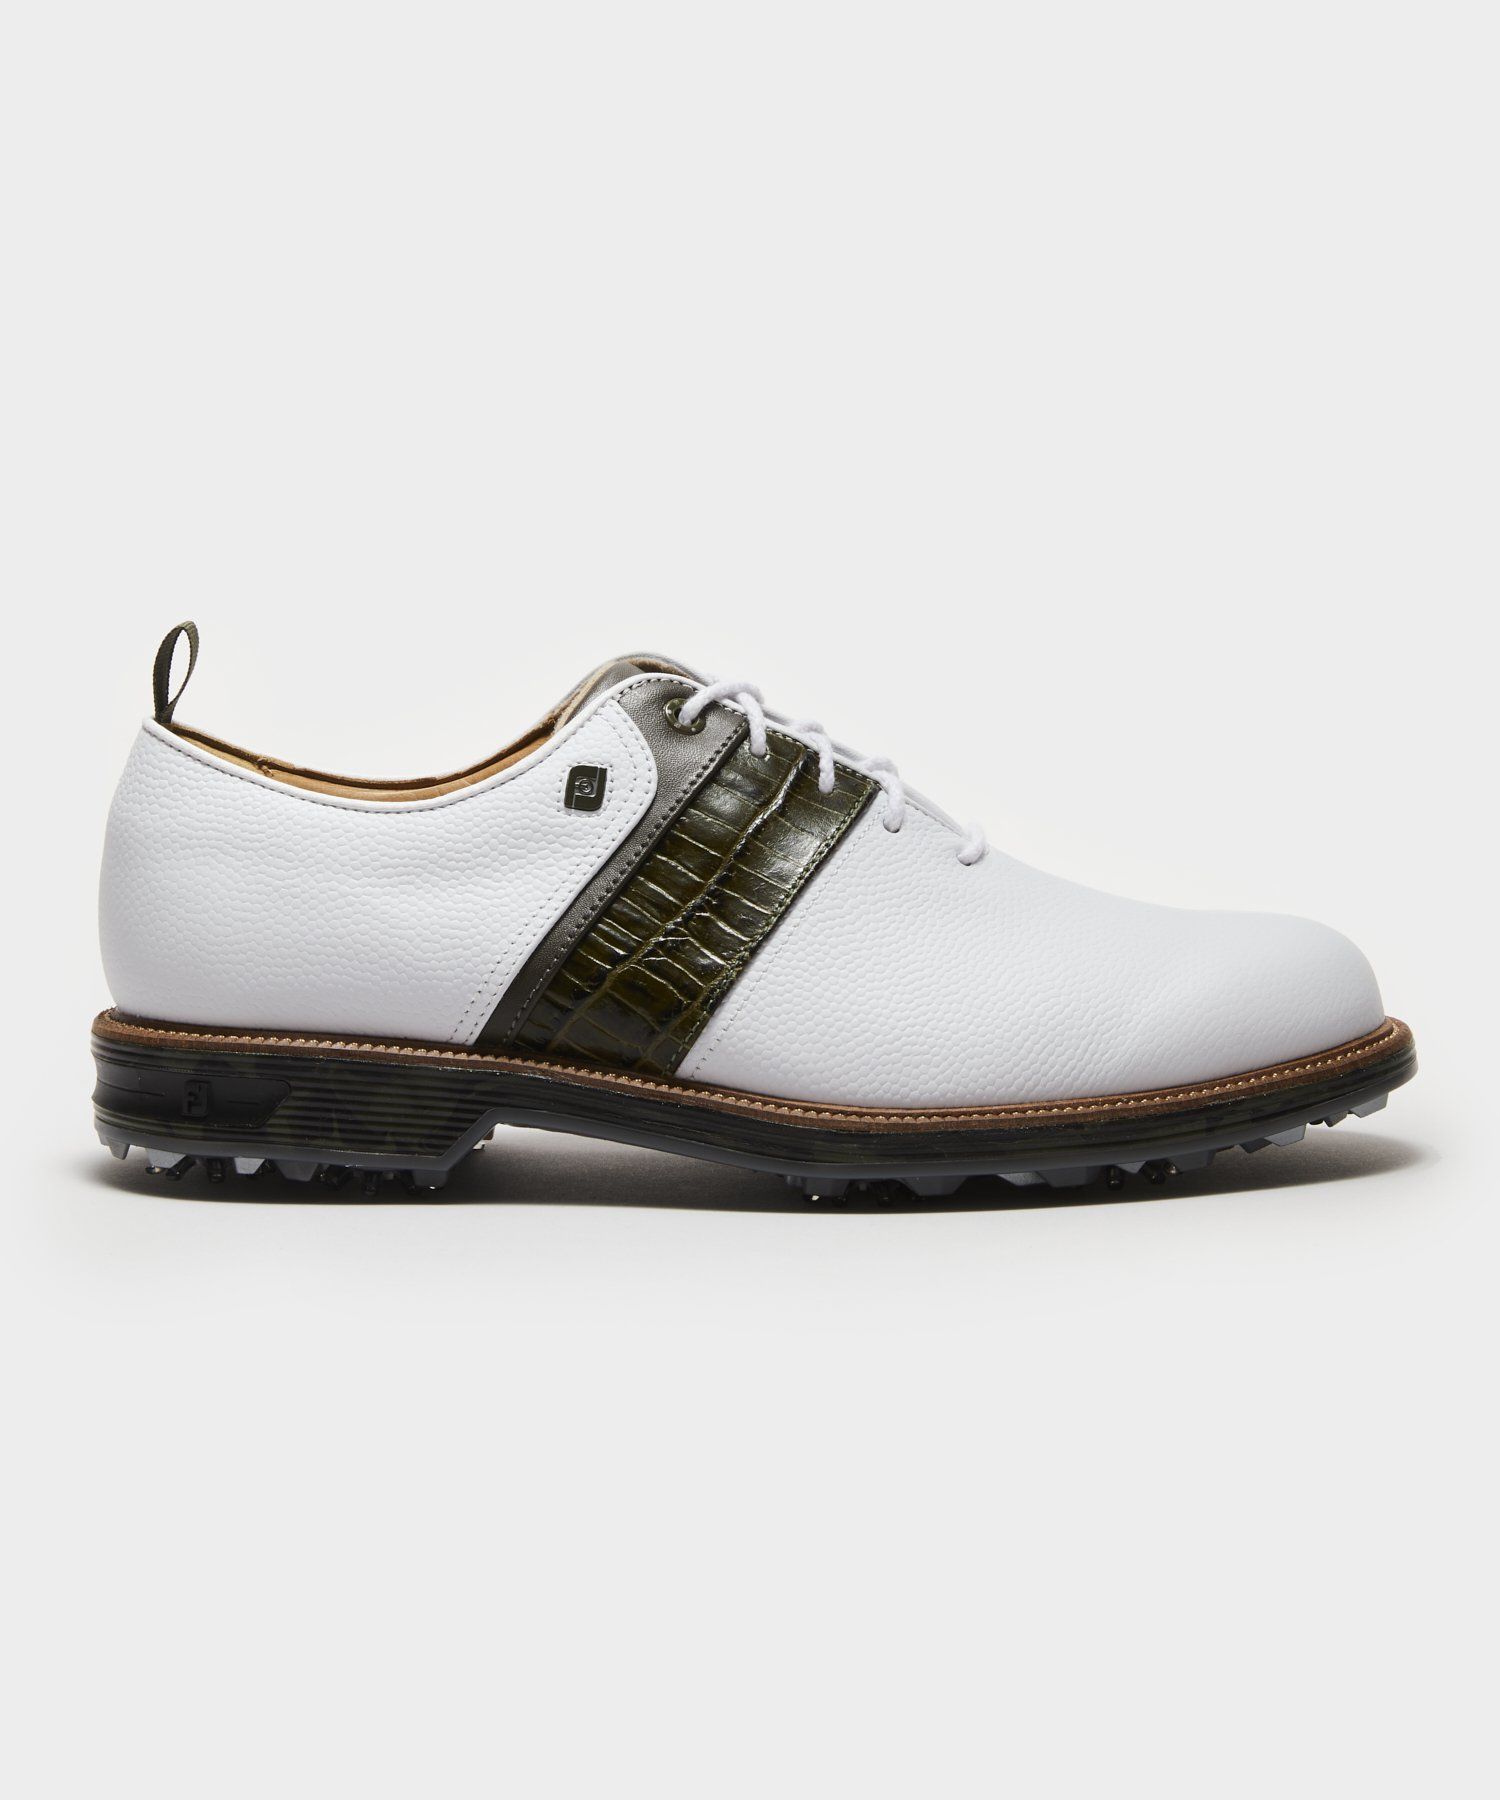 Packard Golf Shoe in White/Olive